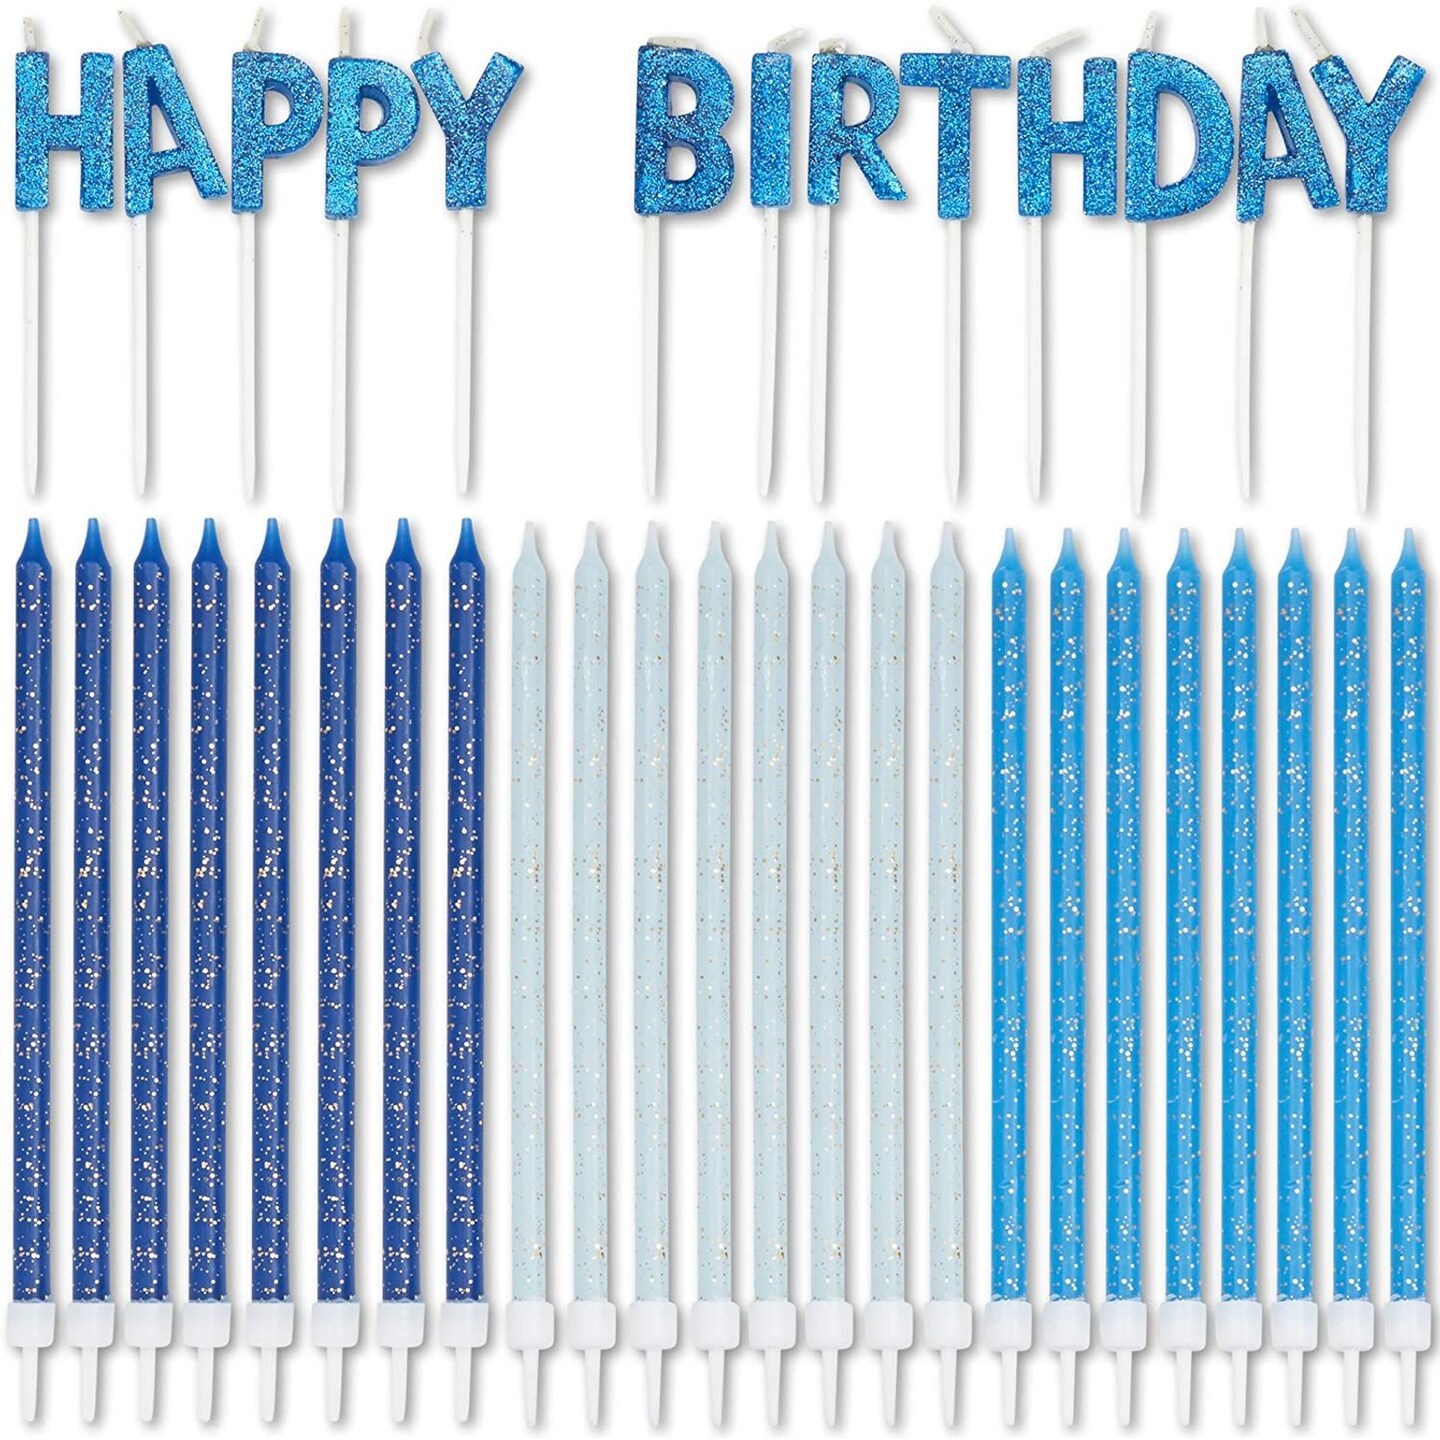 Happy Birthday Cake Topper Letters with Long Thin Glitter Candles in Holders (37 Pack)